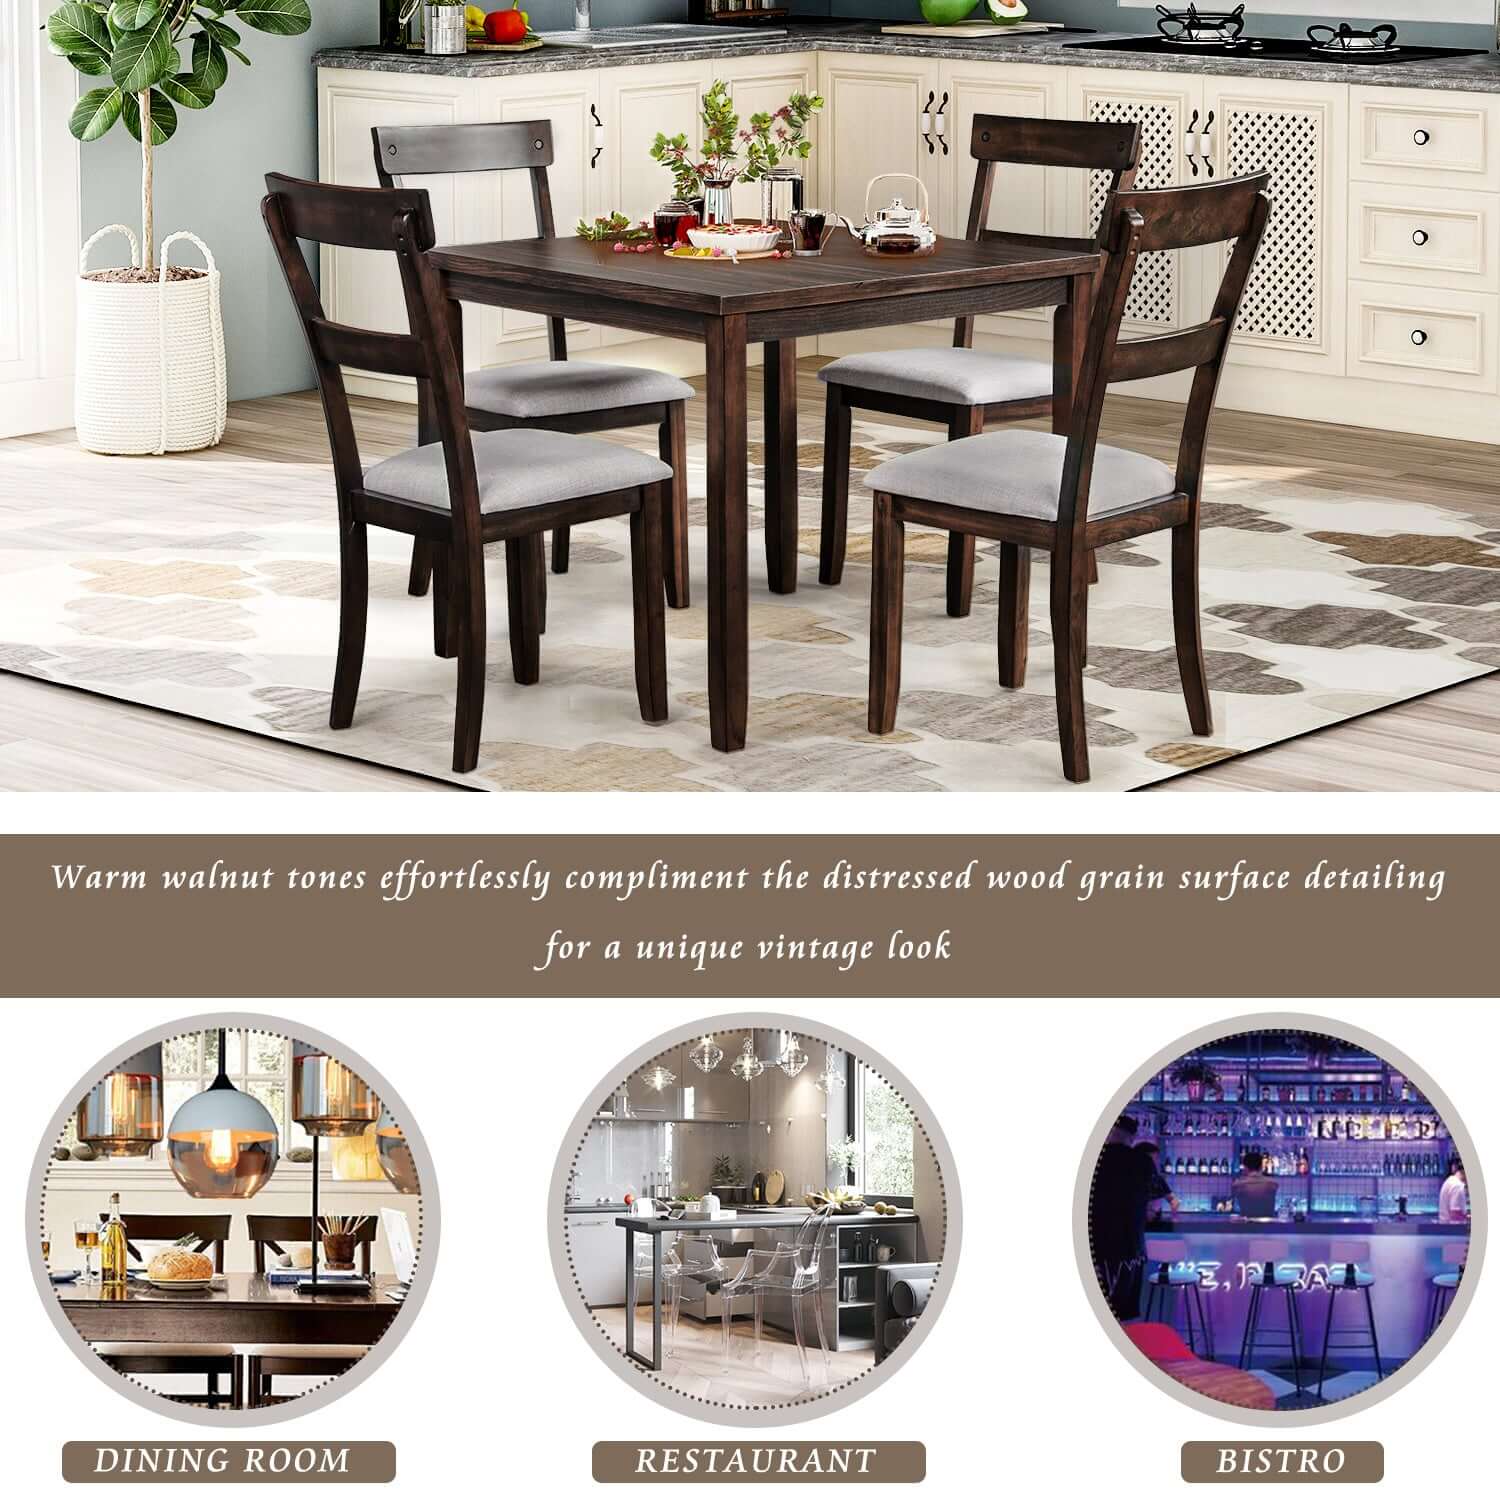 5 Piece Dining Table Set Industrial Wooden Kitchen Table and 4 Chairs for Dining Room in a modern kitchen with decor options